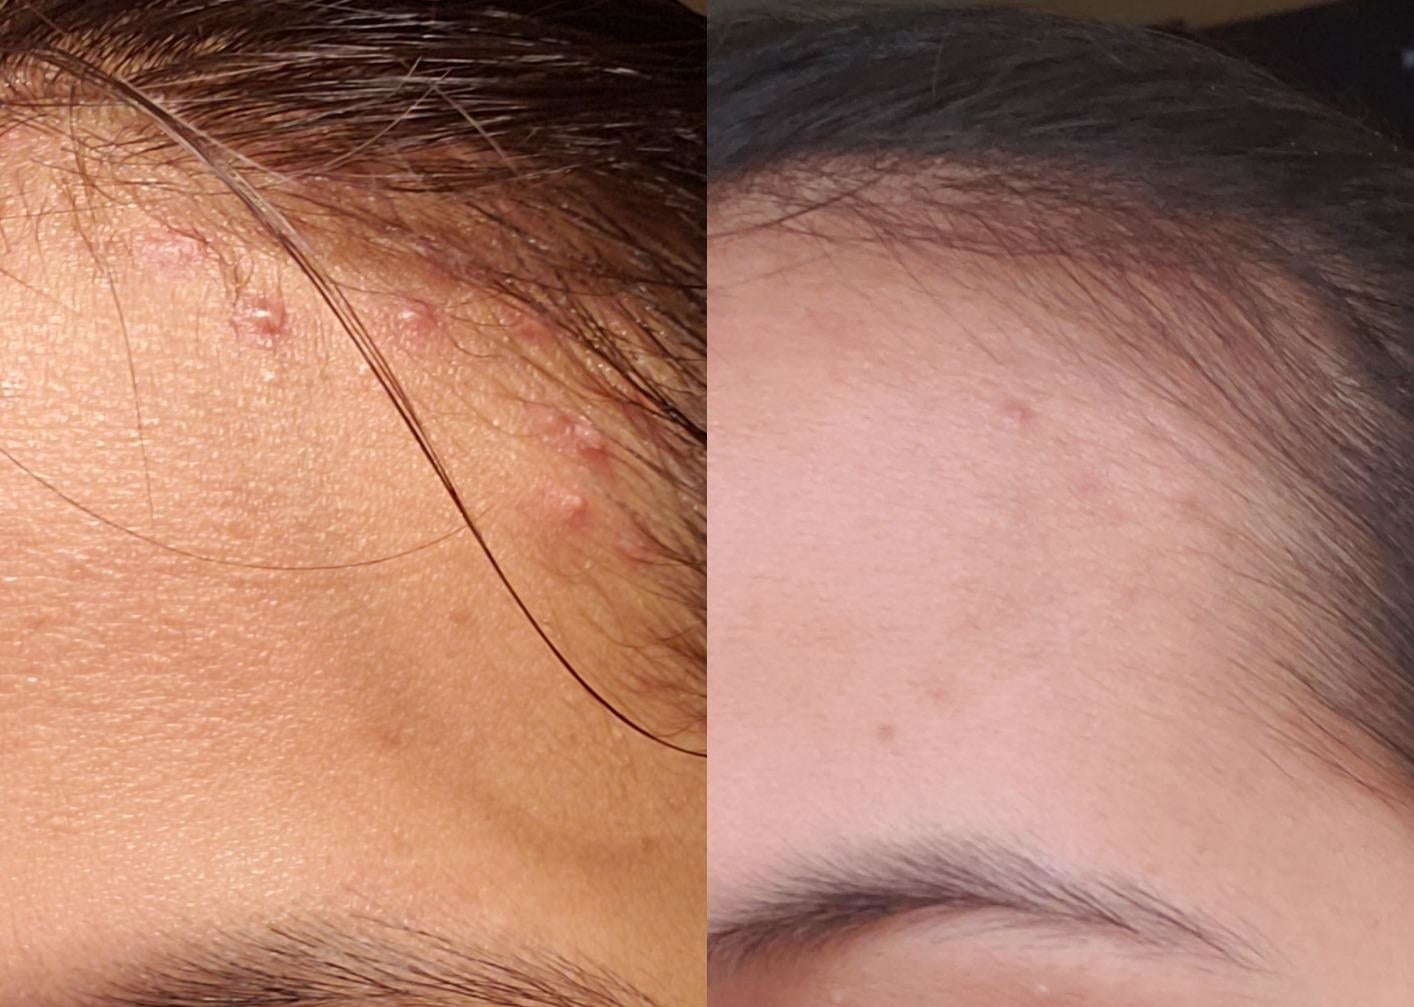 reviewer&#x27;s before and after picture which shows acne on their forehead and then a near-clear forehead